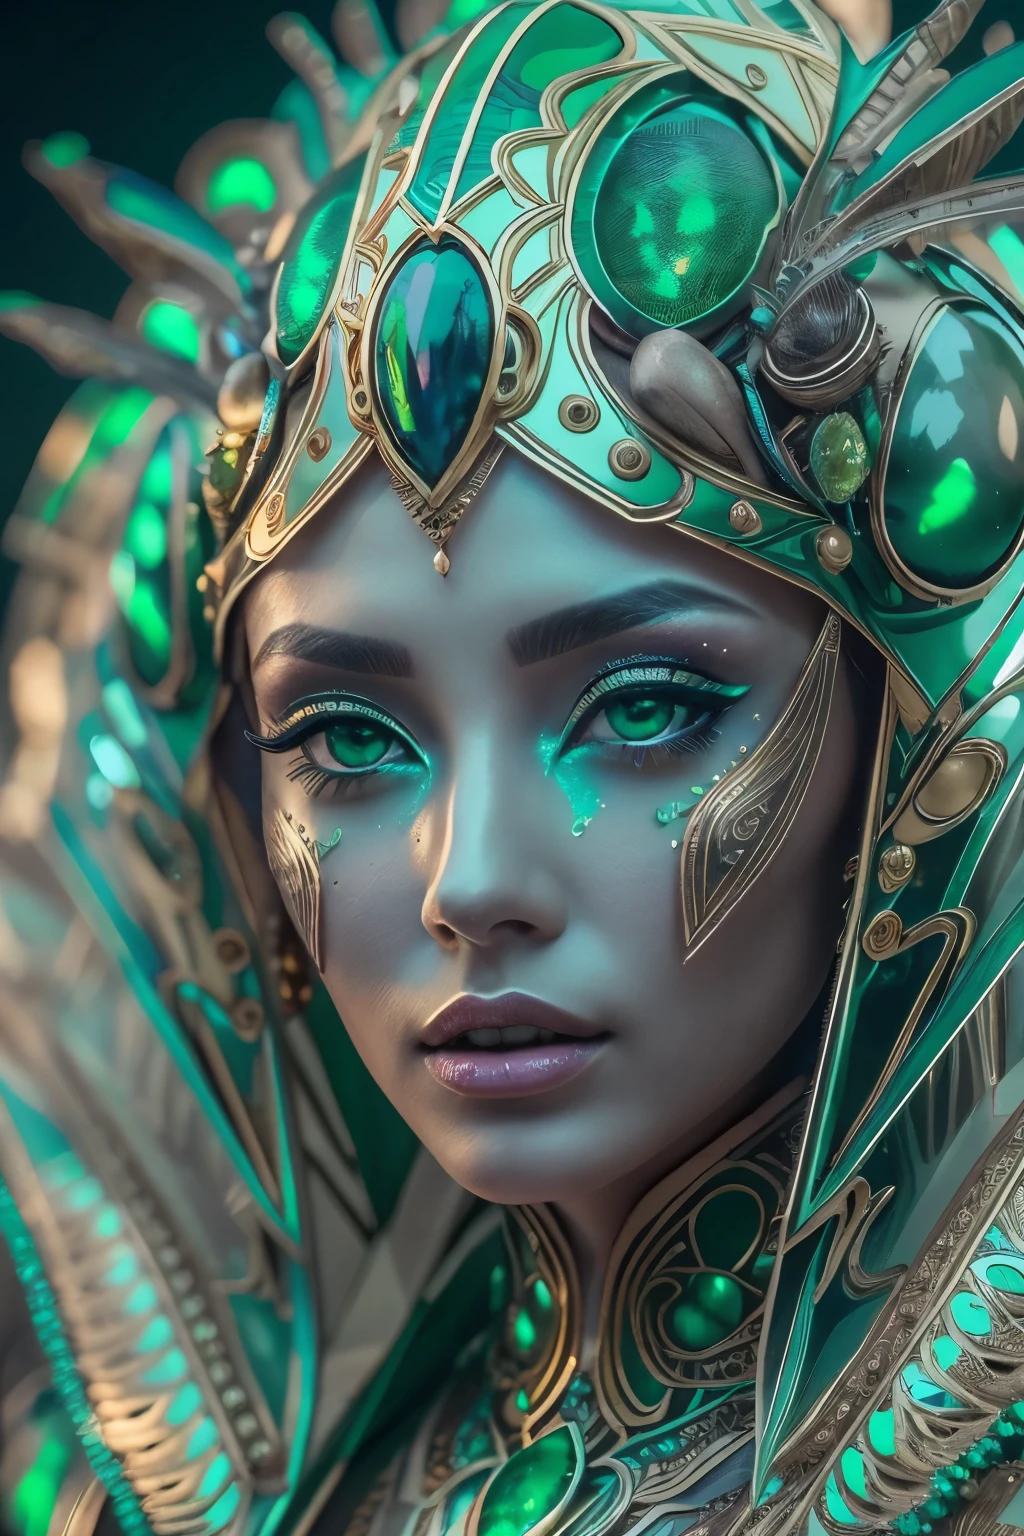 (best quality,4k,8k,highres,masterpiece:1.2),ultra-detailed,(photorealistic,photo-realistic:1.37), A female alien with compound eyes that look like the eyes of a praying mantis,futuristic,hi-tech,natural-looking skin,emerald-green compound eyes,exquisite,detailed face features,piercing eyes,long eyelashes and sharp angles,sculptural facial structure,innovative fashion style,metallic,shimmering make-up,glowing eyeliner,ornate futuristic jewelry,elaborate headpiece,feathers and metallic elements,ethereal background with floating holographic particles,controlled lighting with soft highlights,bluish-green color scheme,otherworldly atmosphere.